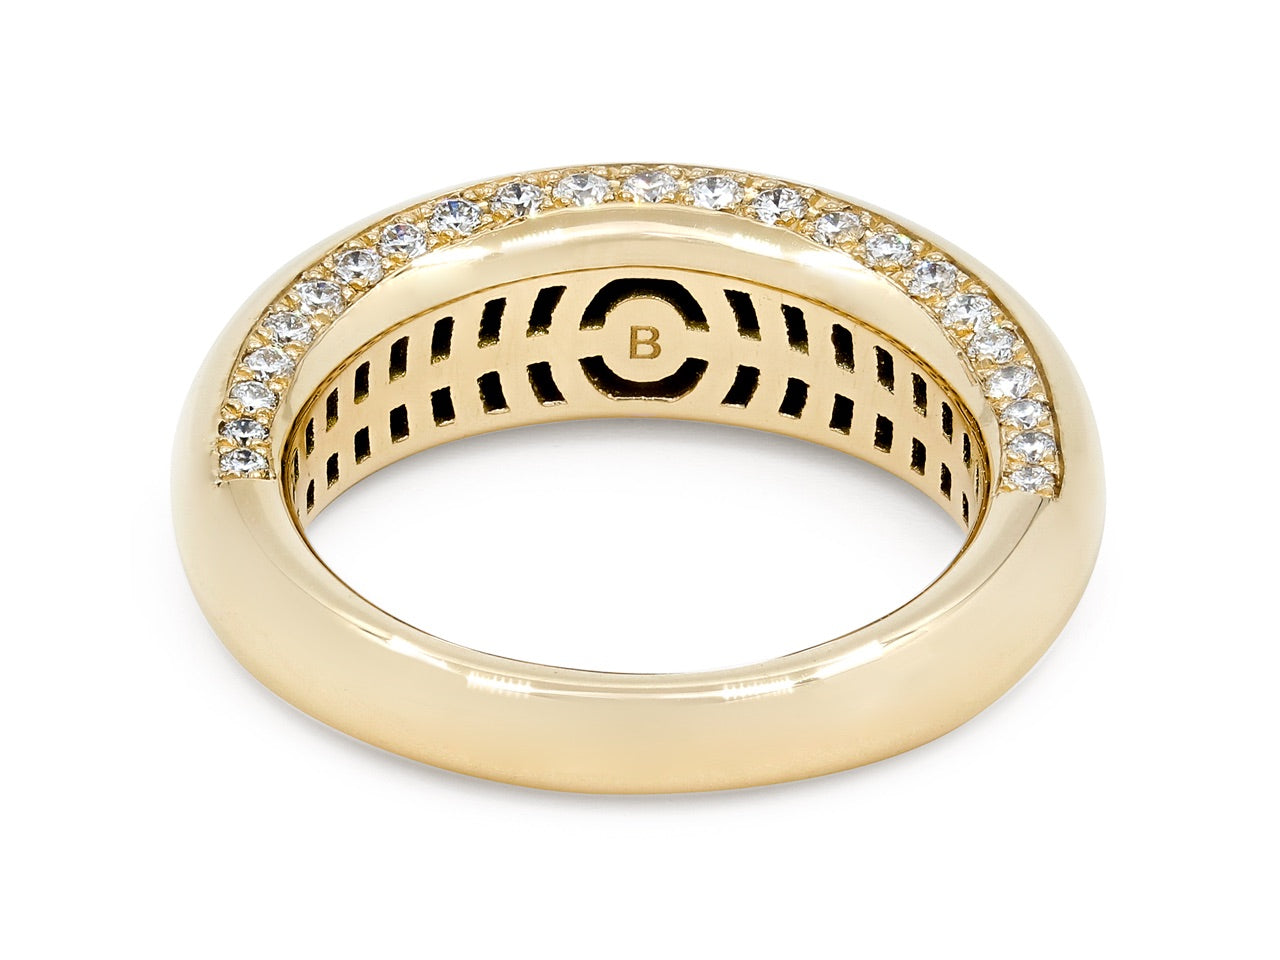 Bombé Gold Ring, with Diamonds, in 18K, by Beladora